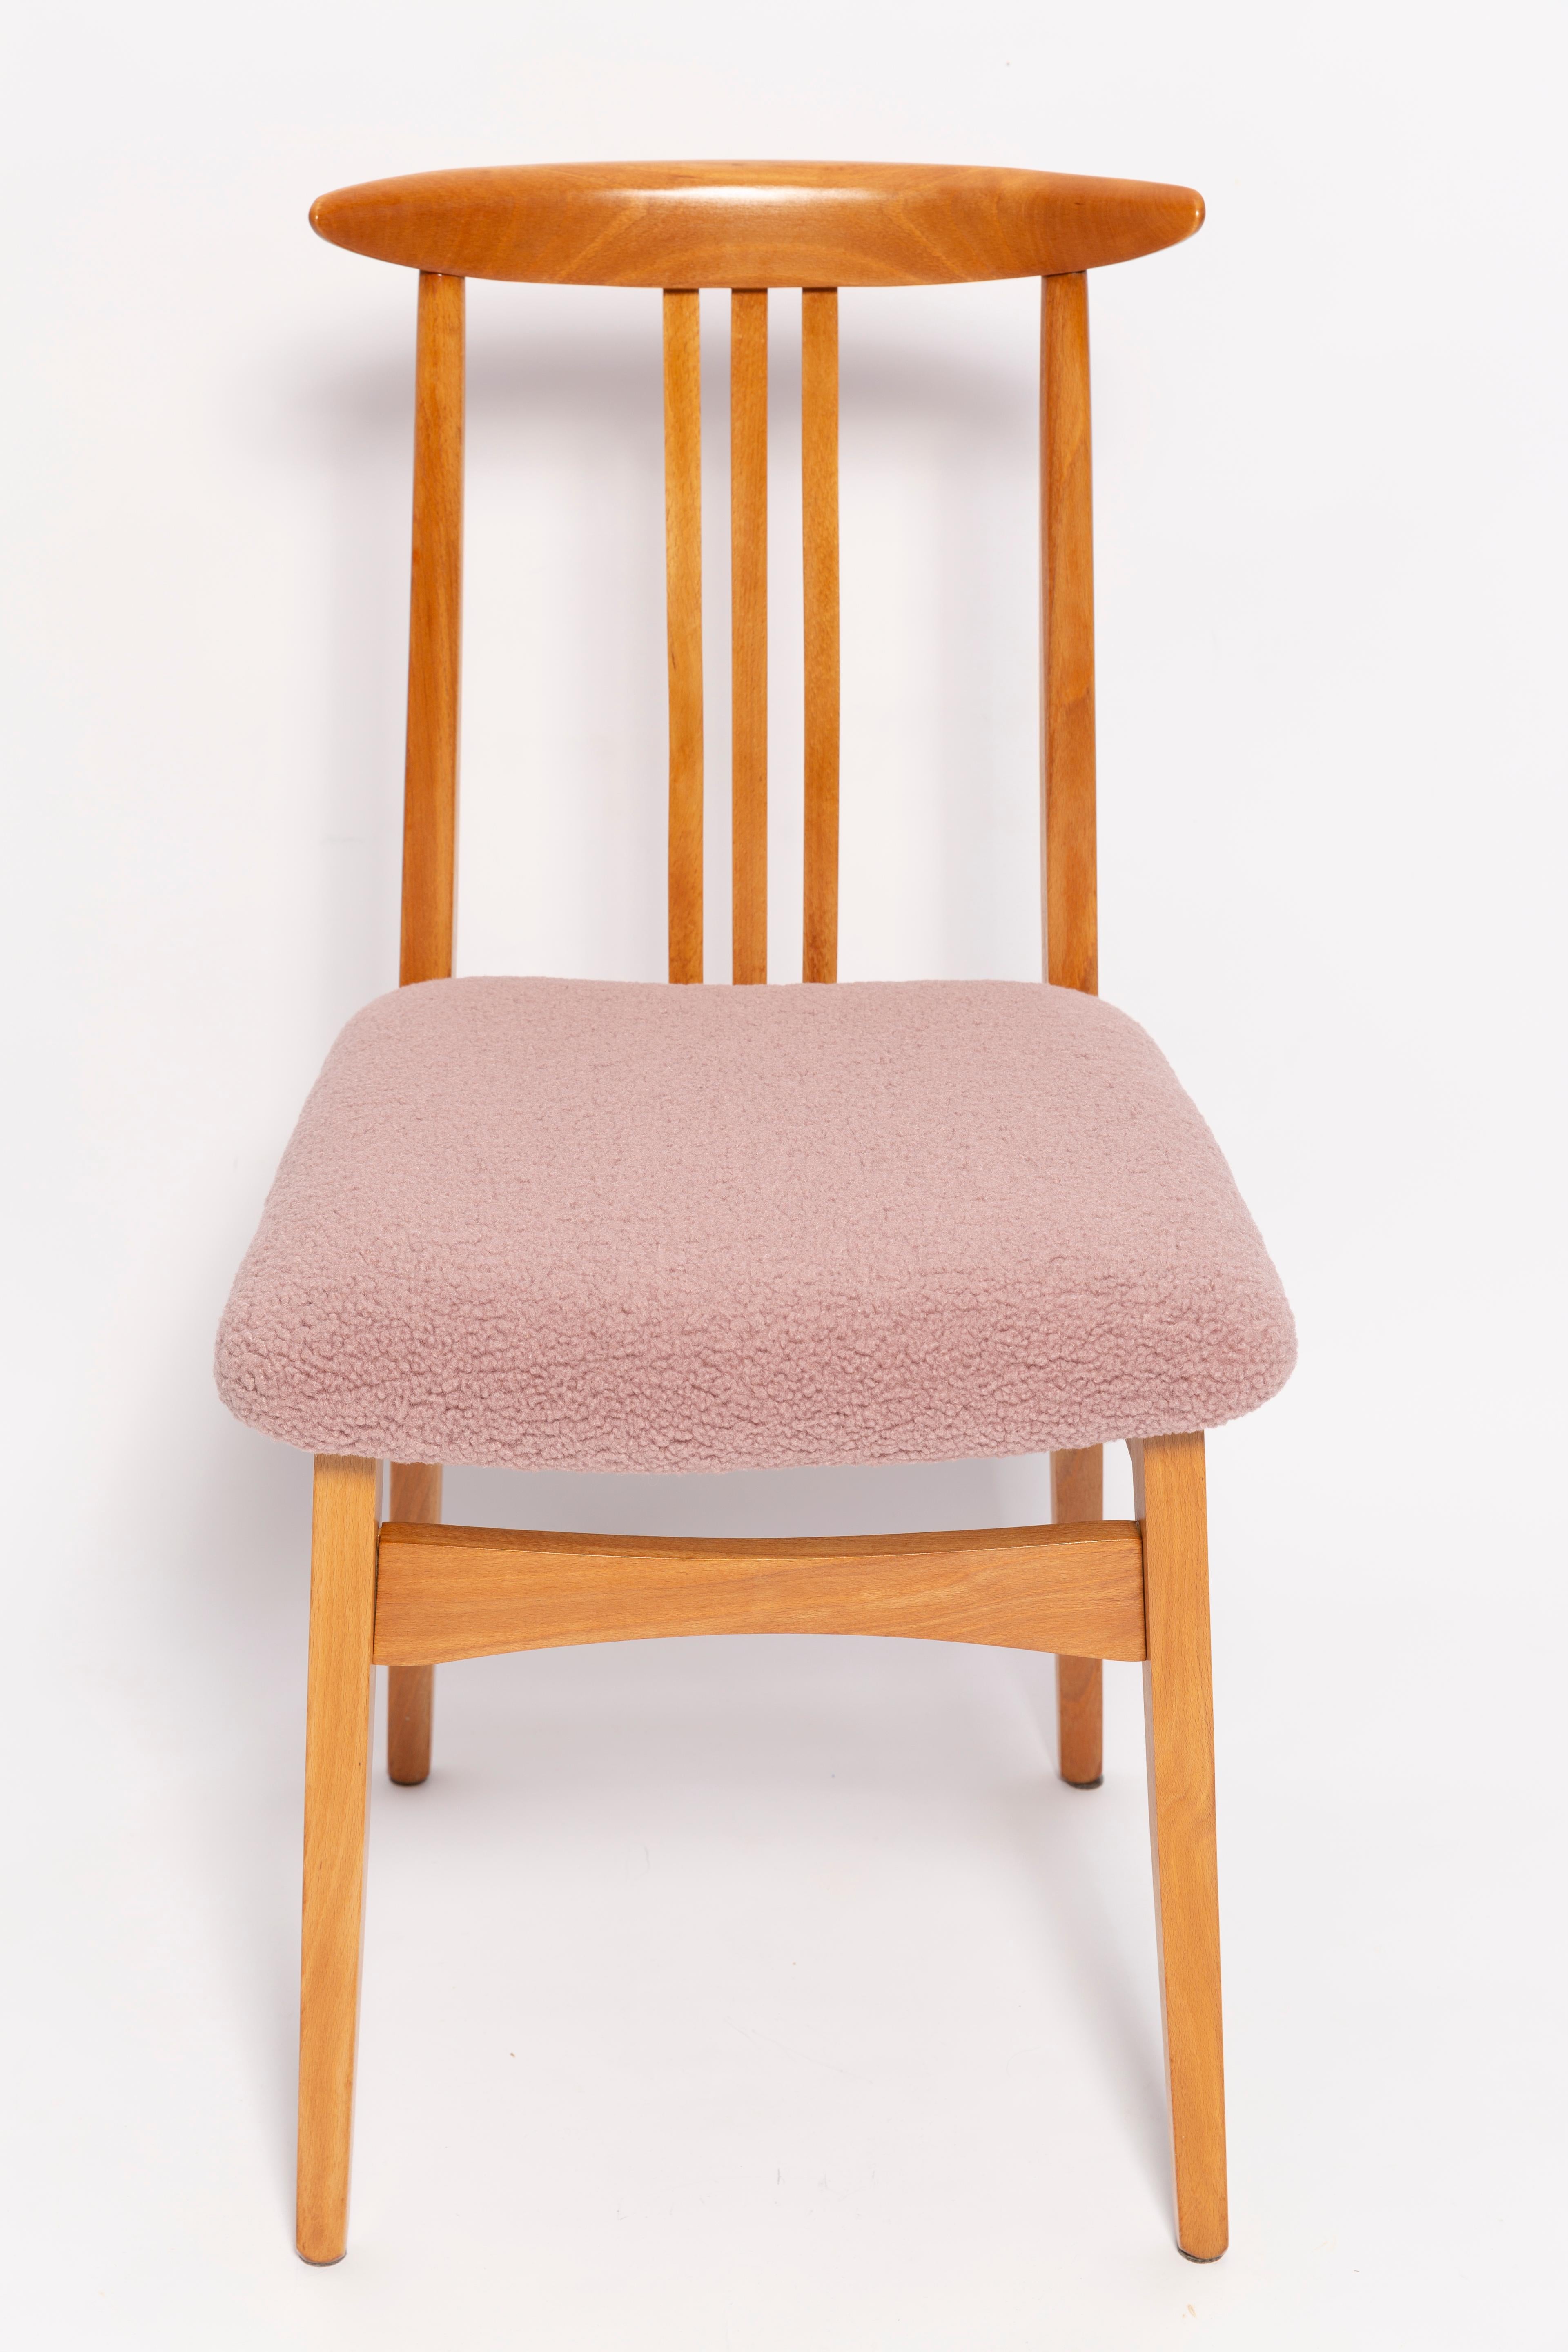 Polish Mid-Century Pink Blush Boucle Chair, Light Wood, by M. Zielinski, Europe, 1960s For Sale